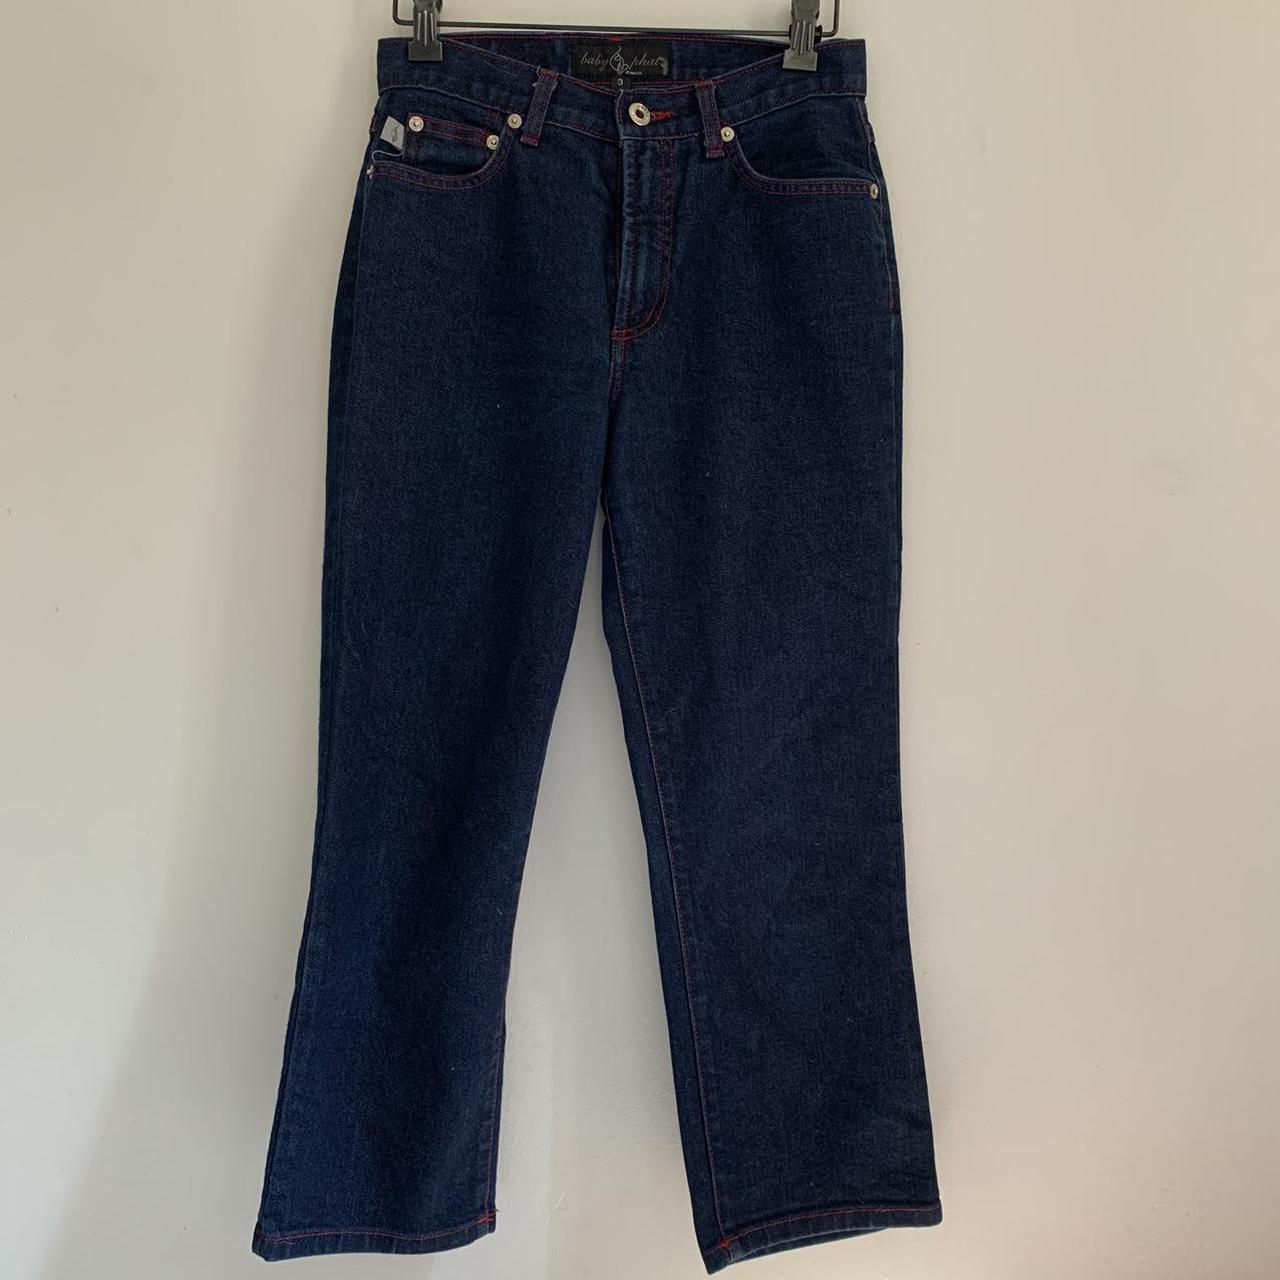 Baby Phat Women's Navy and Red Jeans | Depop